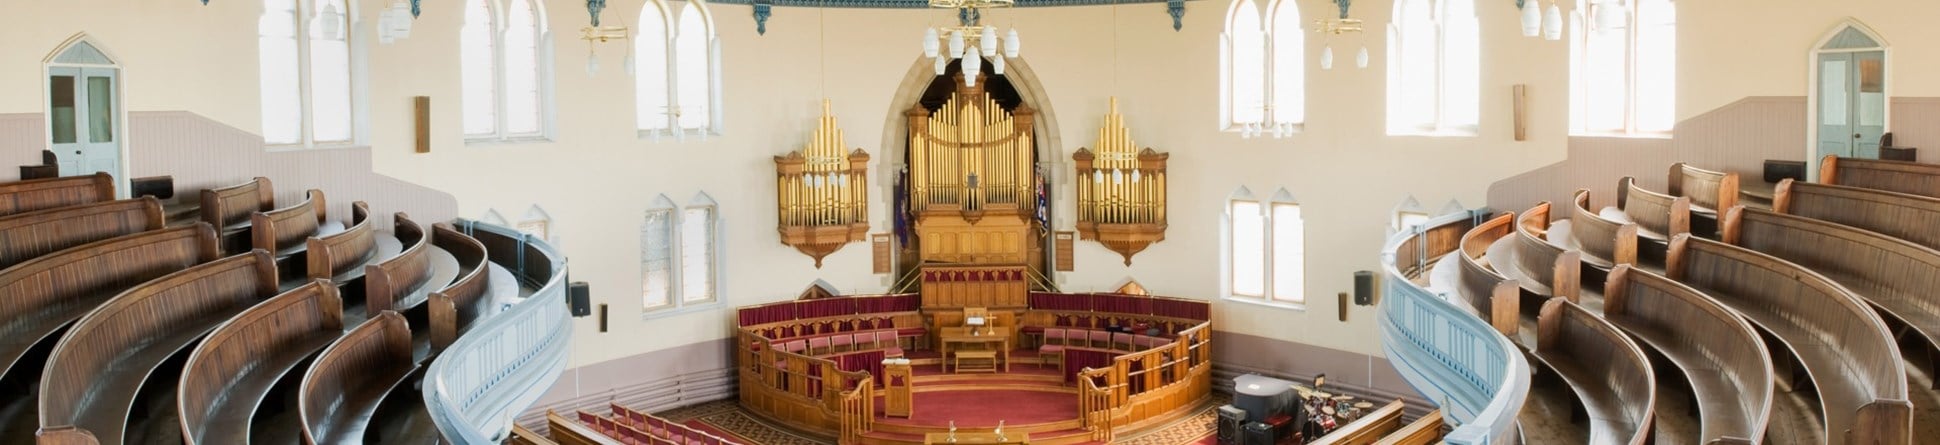 Interior, first floor, showing curved pews on first floor, straight pews on ground floor with organ pipes and central pulpit.